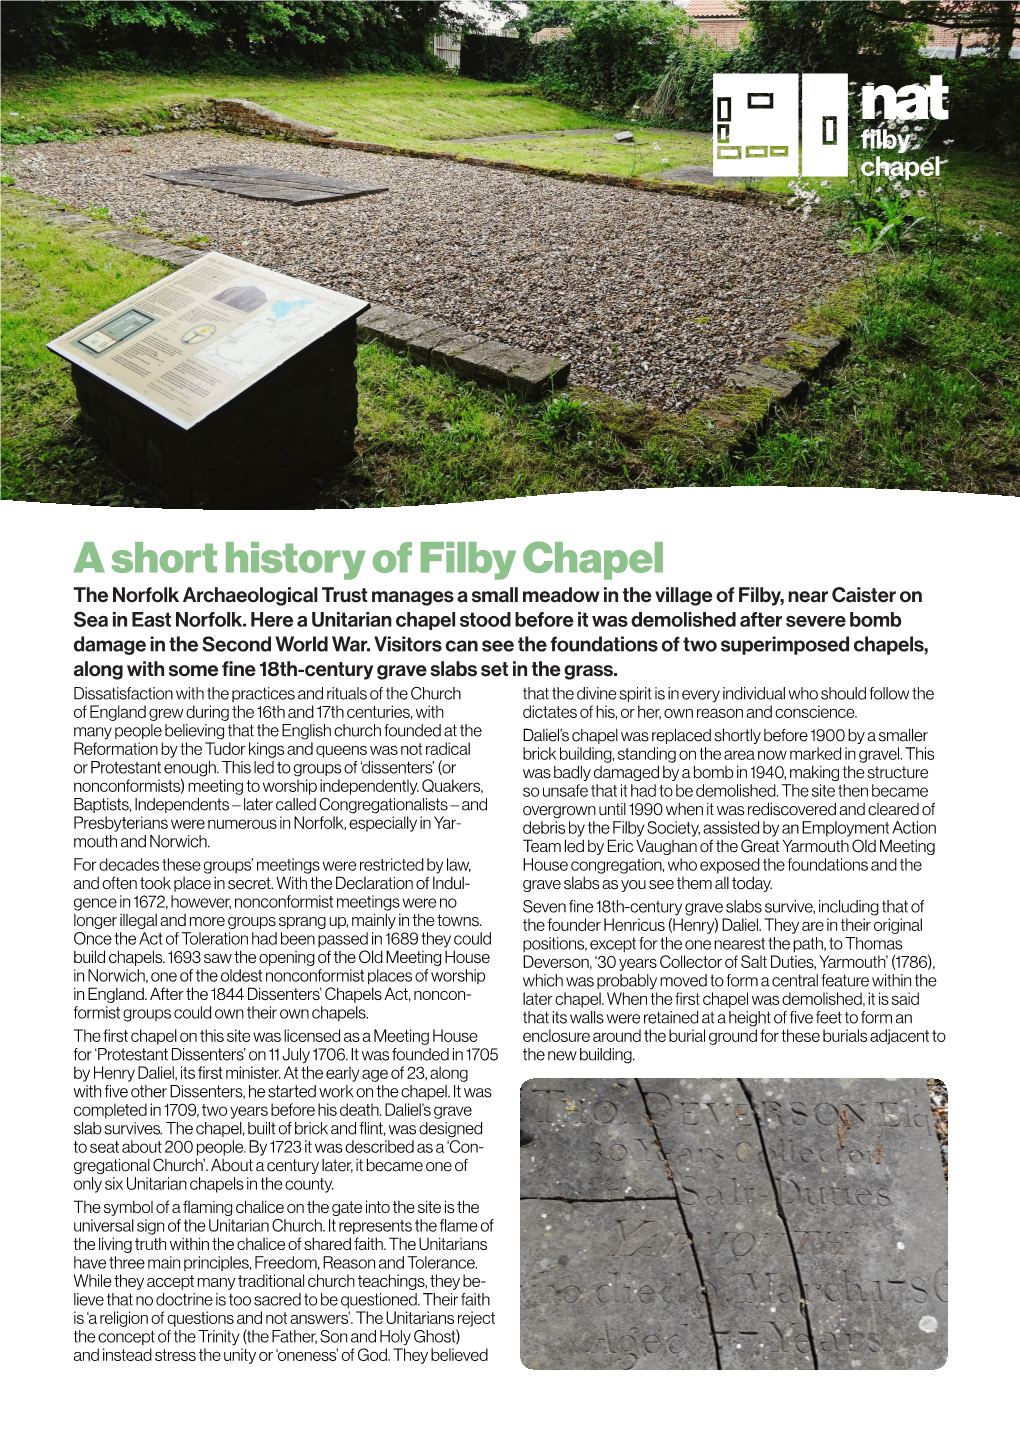 A Short History of Filby Chapel the Norfolk Archaeological Trust Manages a Small Meadow in the Village of Filby, Near Caister on Sea in East Norfolk